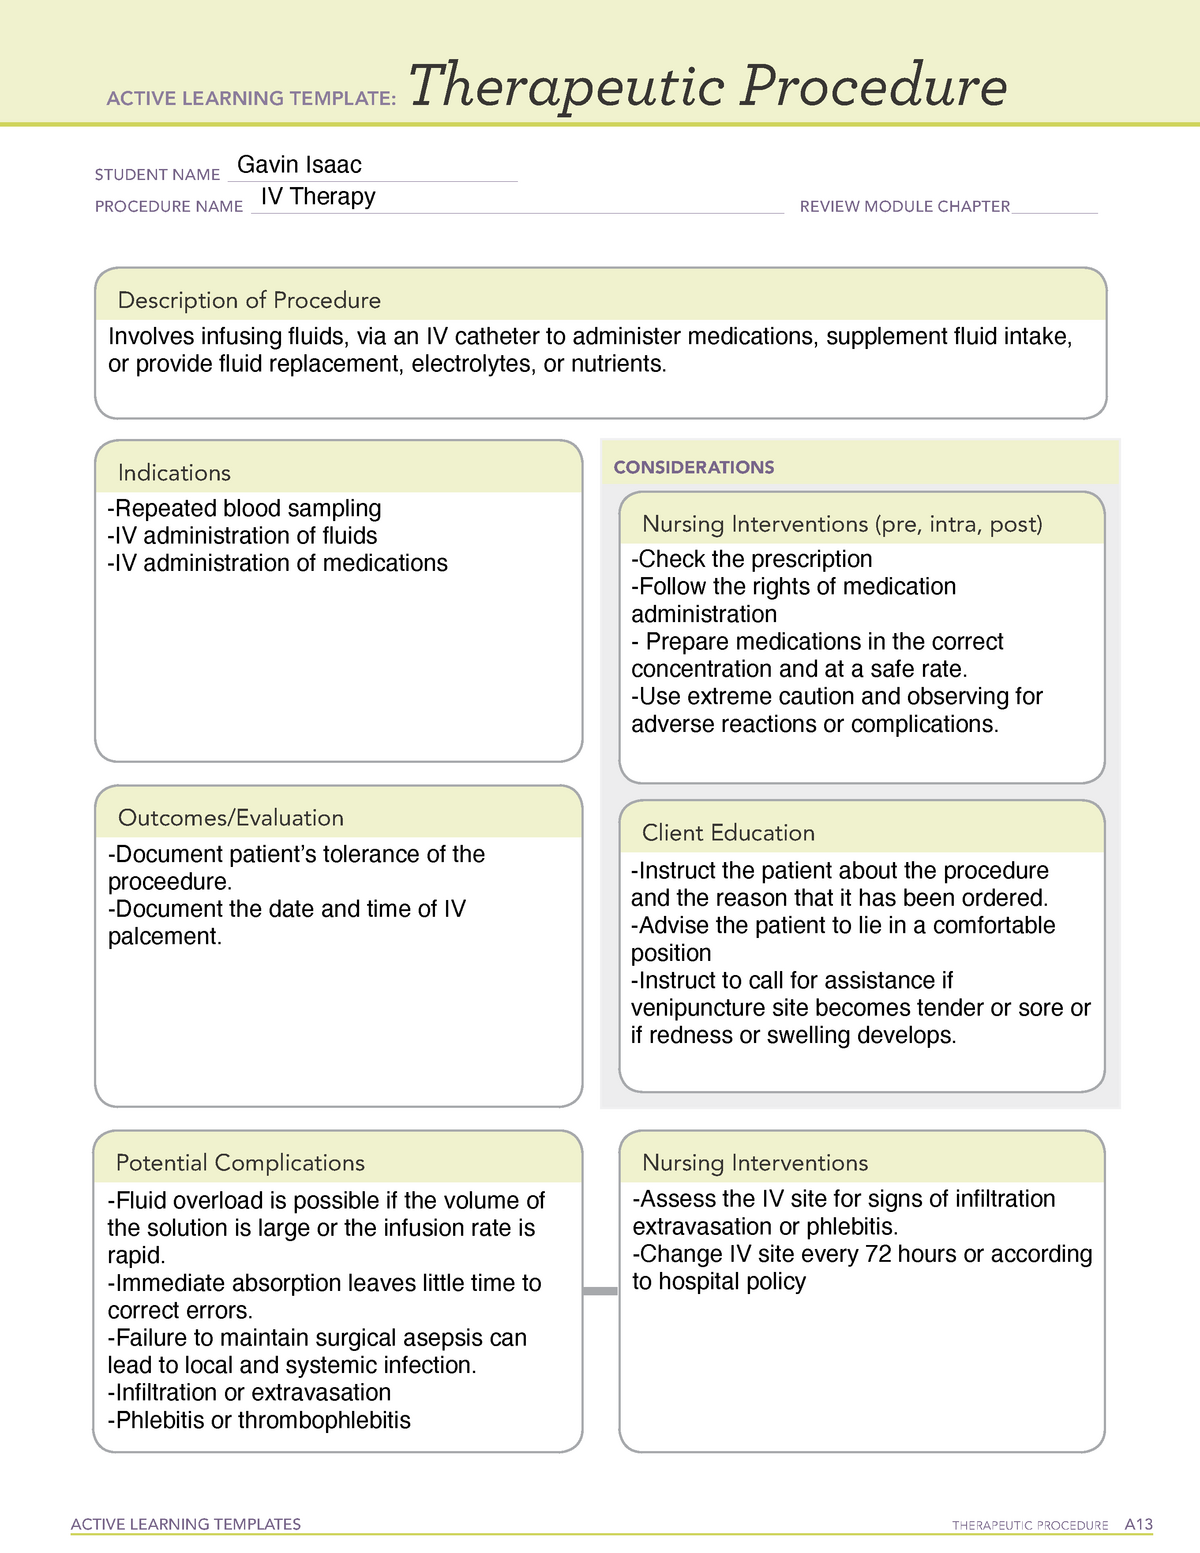 activelearningtemplate-therapeutic-procedure-form-permanent-pacemaker-images